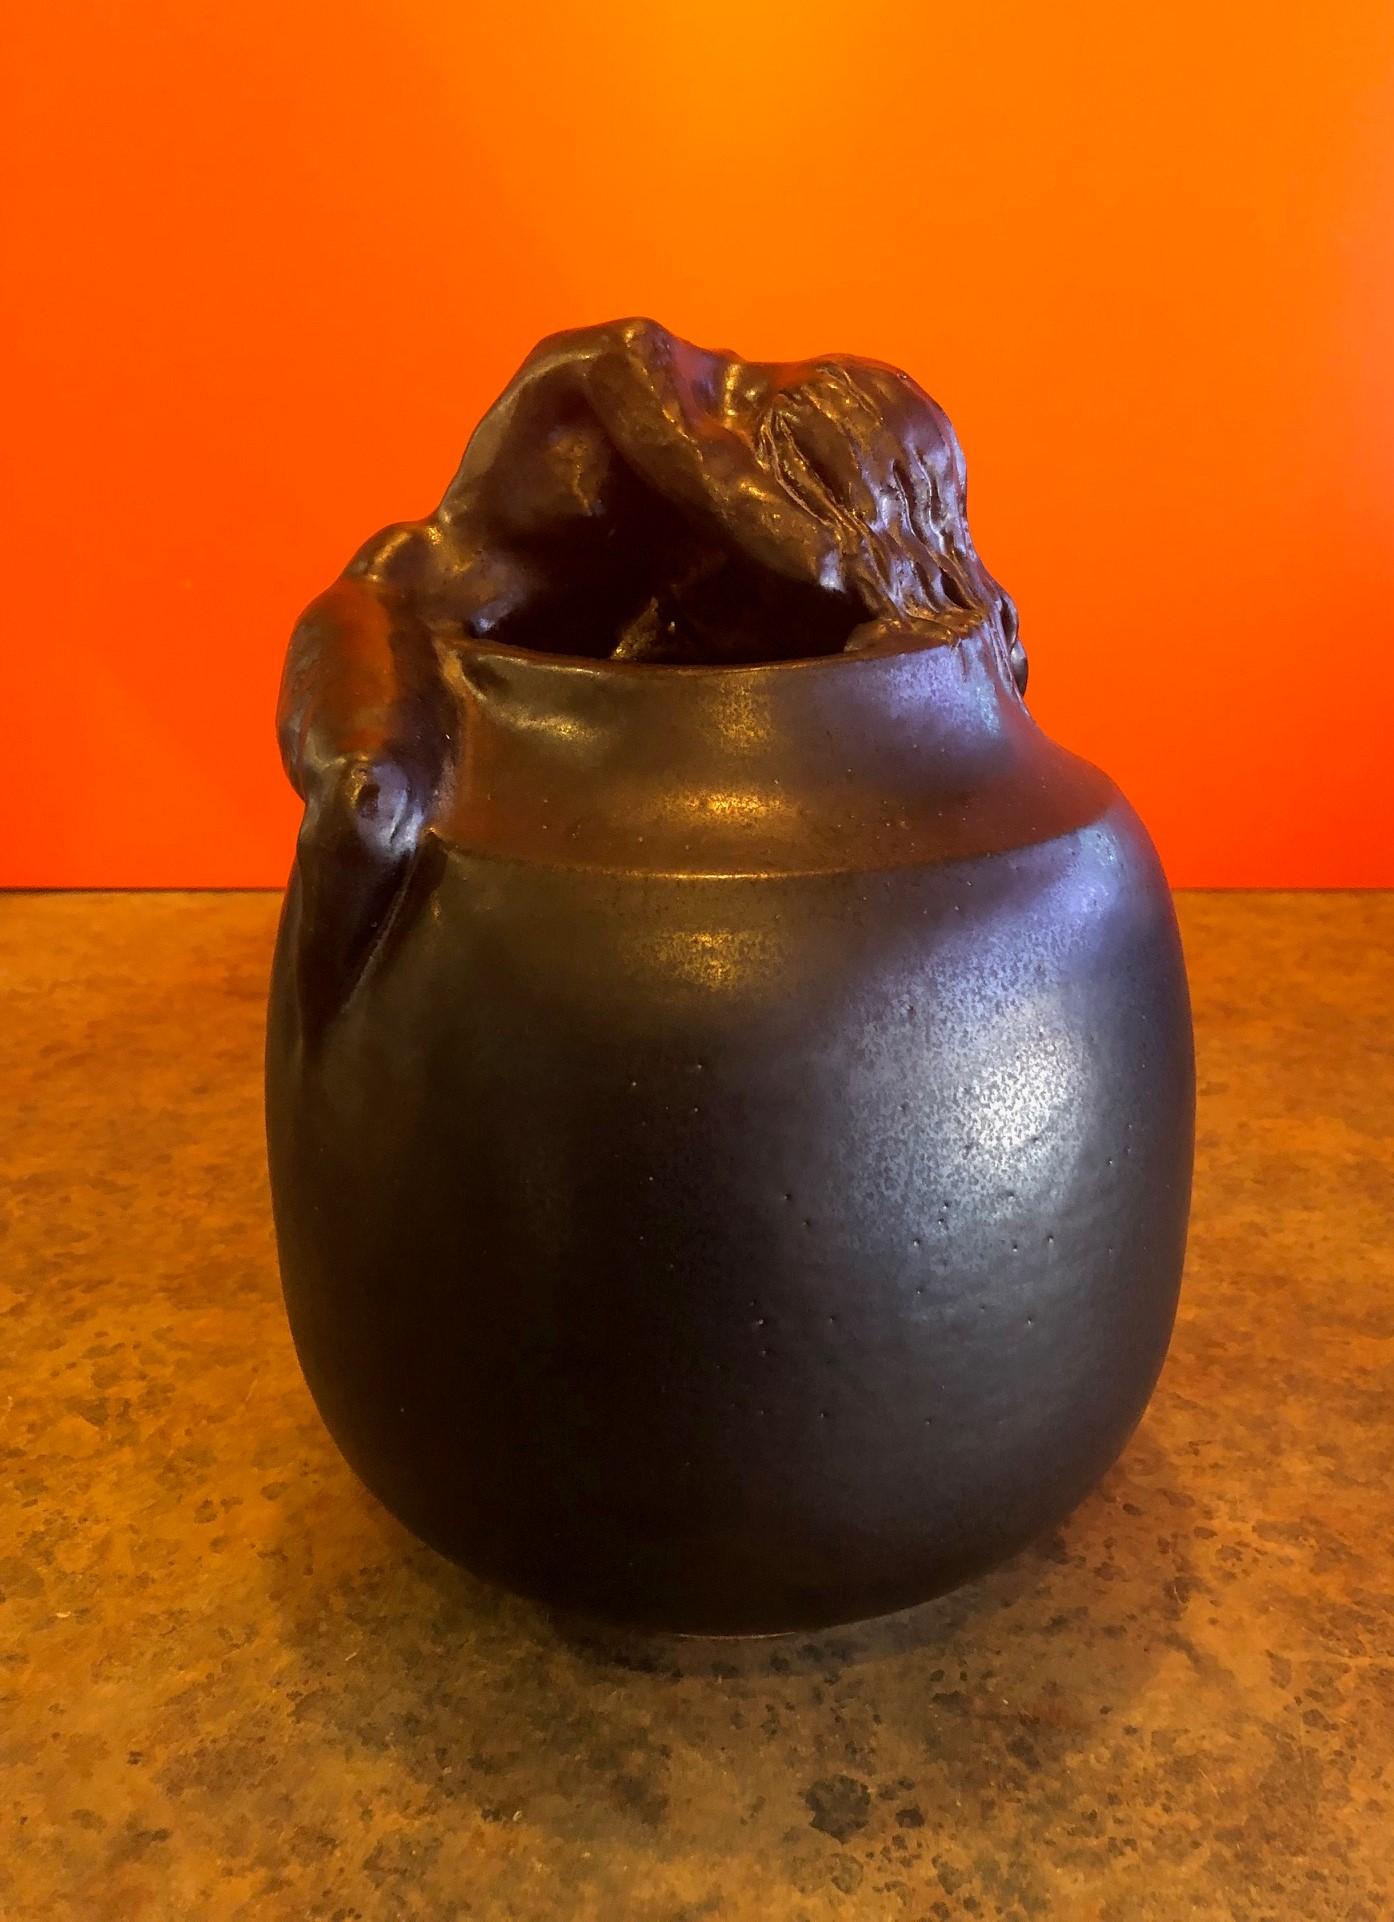 Beautiful hand thrown stoneware pottery vase with nude woman lying on the top ridge, circa 2000. The piece is finished in a matte black glaze and is signed (cannot make out the artists name) and dated on the underside. The piece measures 8